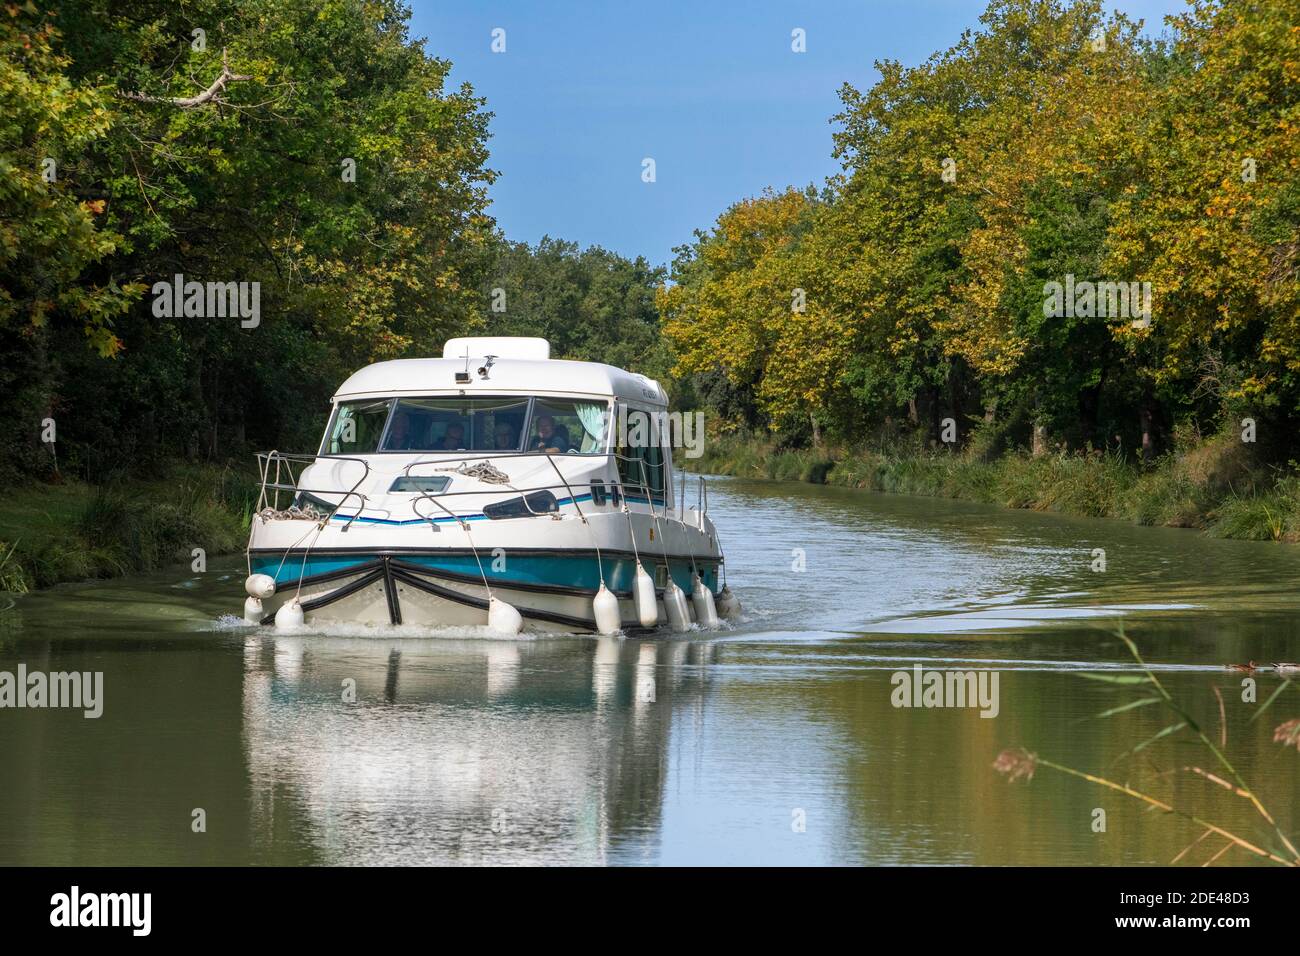 The Canal du Midi, near Carcassonne, French department of Aude, Occitanie Region, Languedoc-Rousillon France. Boats moored on the tree lined canal.  T Stock Photo